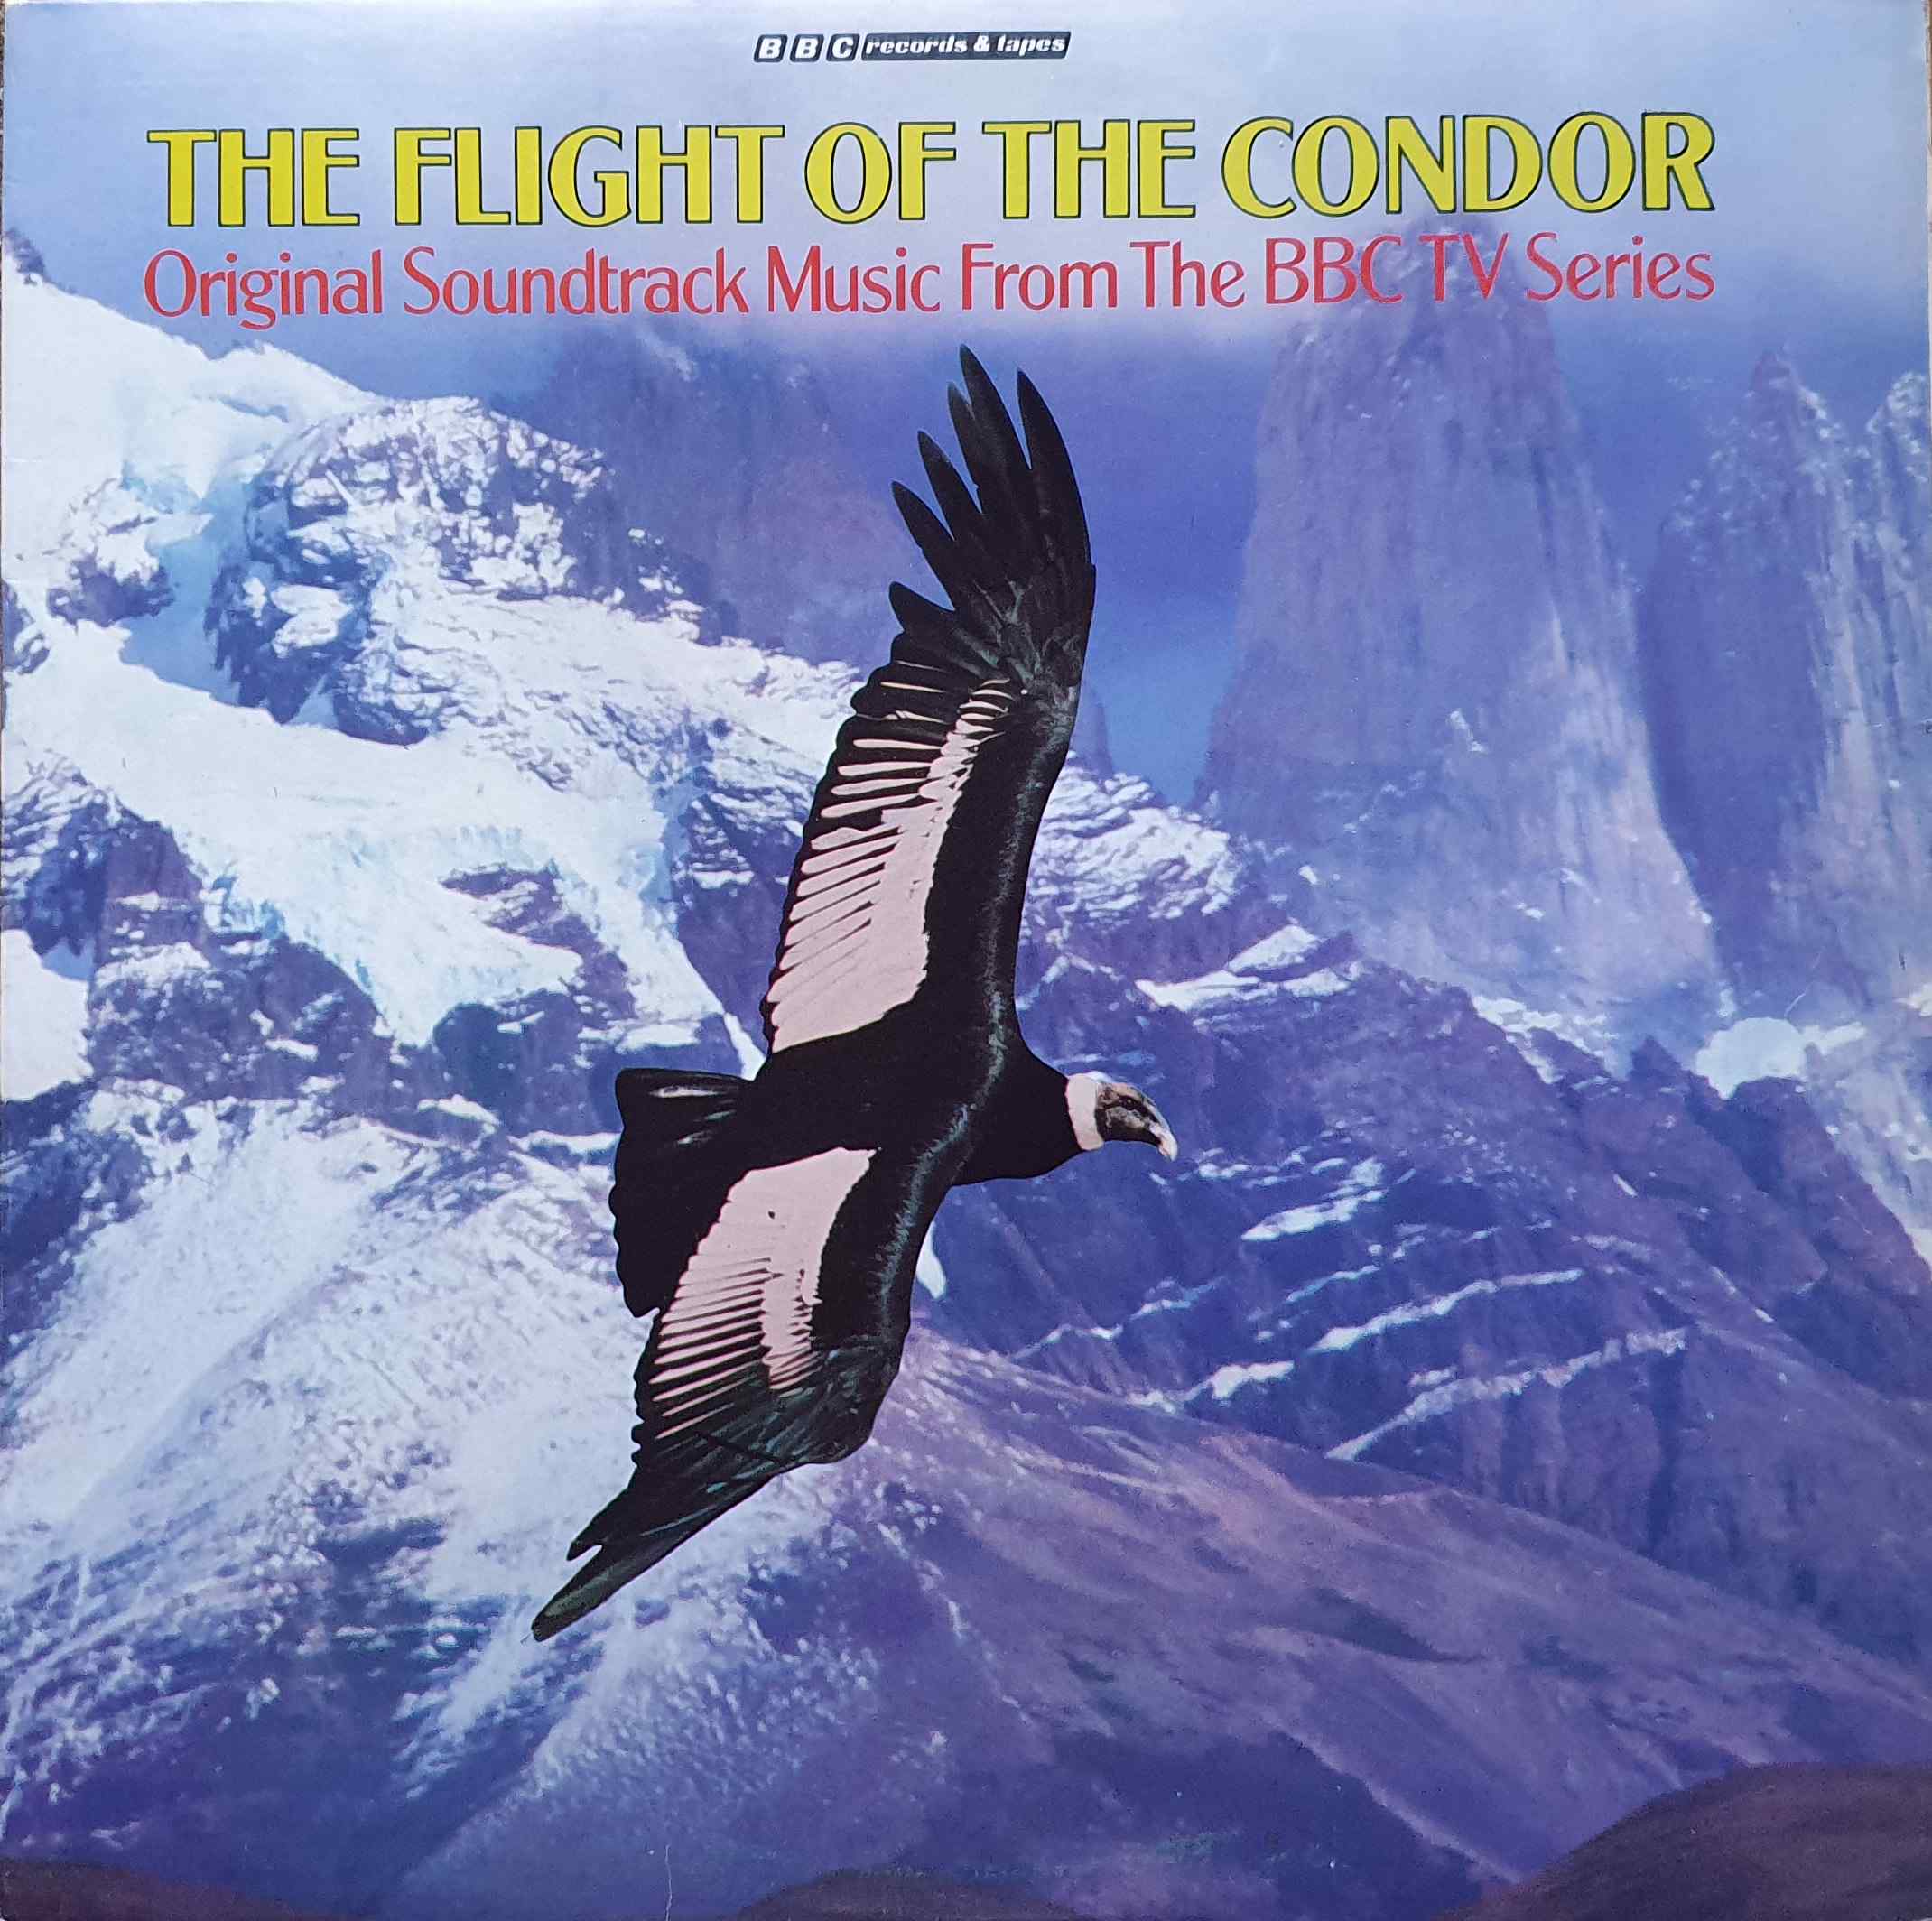 Picture of BBC - 22440 The flight of the condor by artist Various from the BBC albums - Records and Tapes library